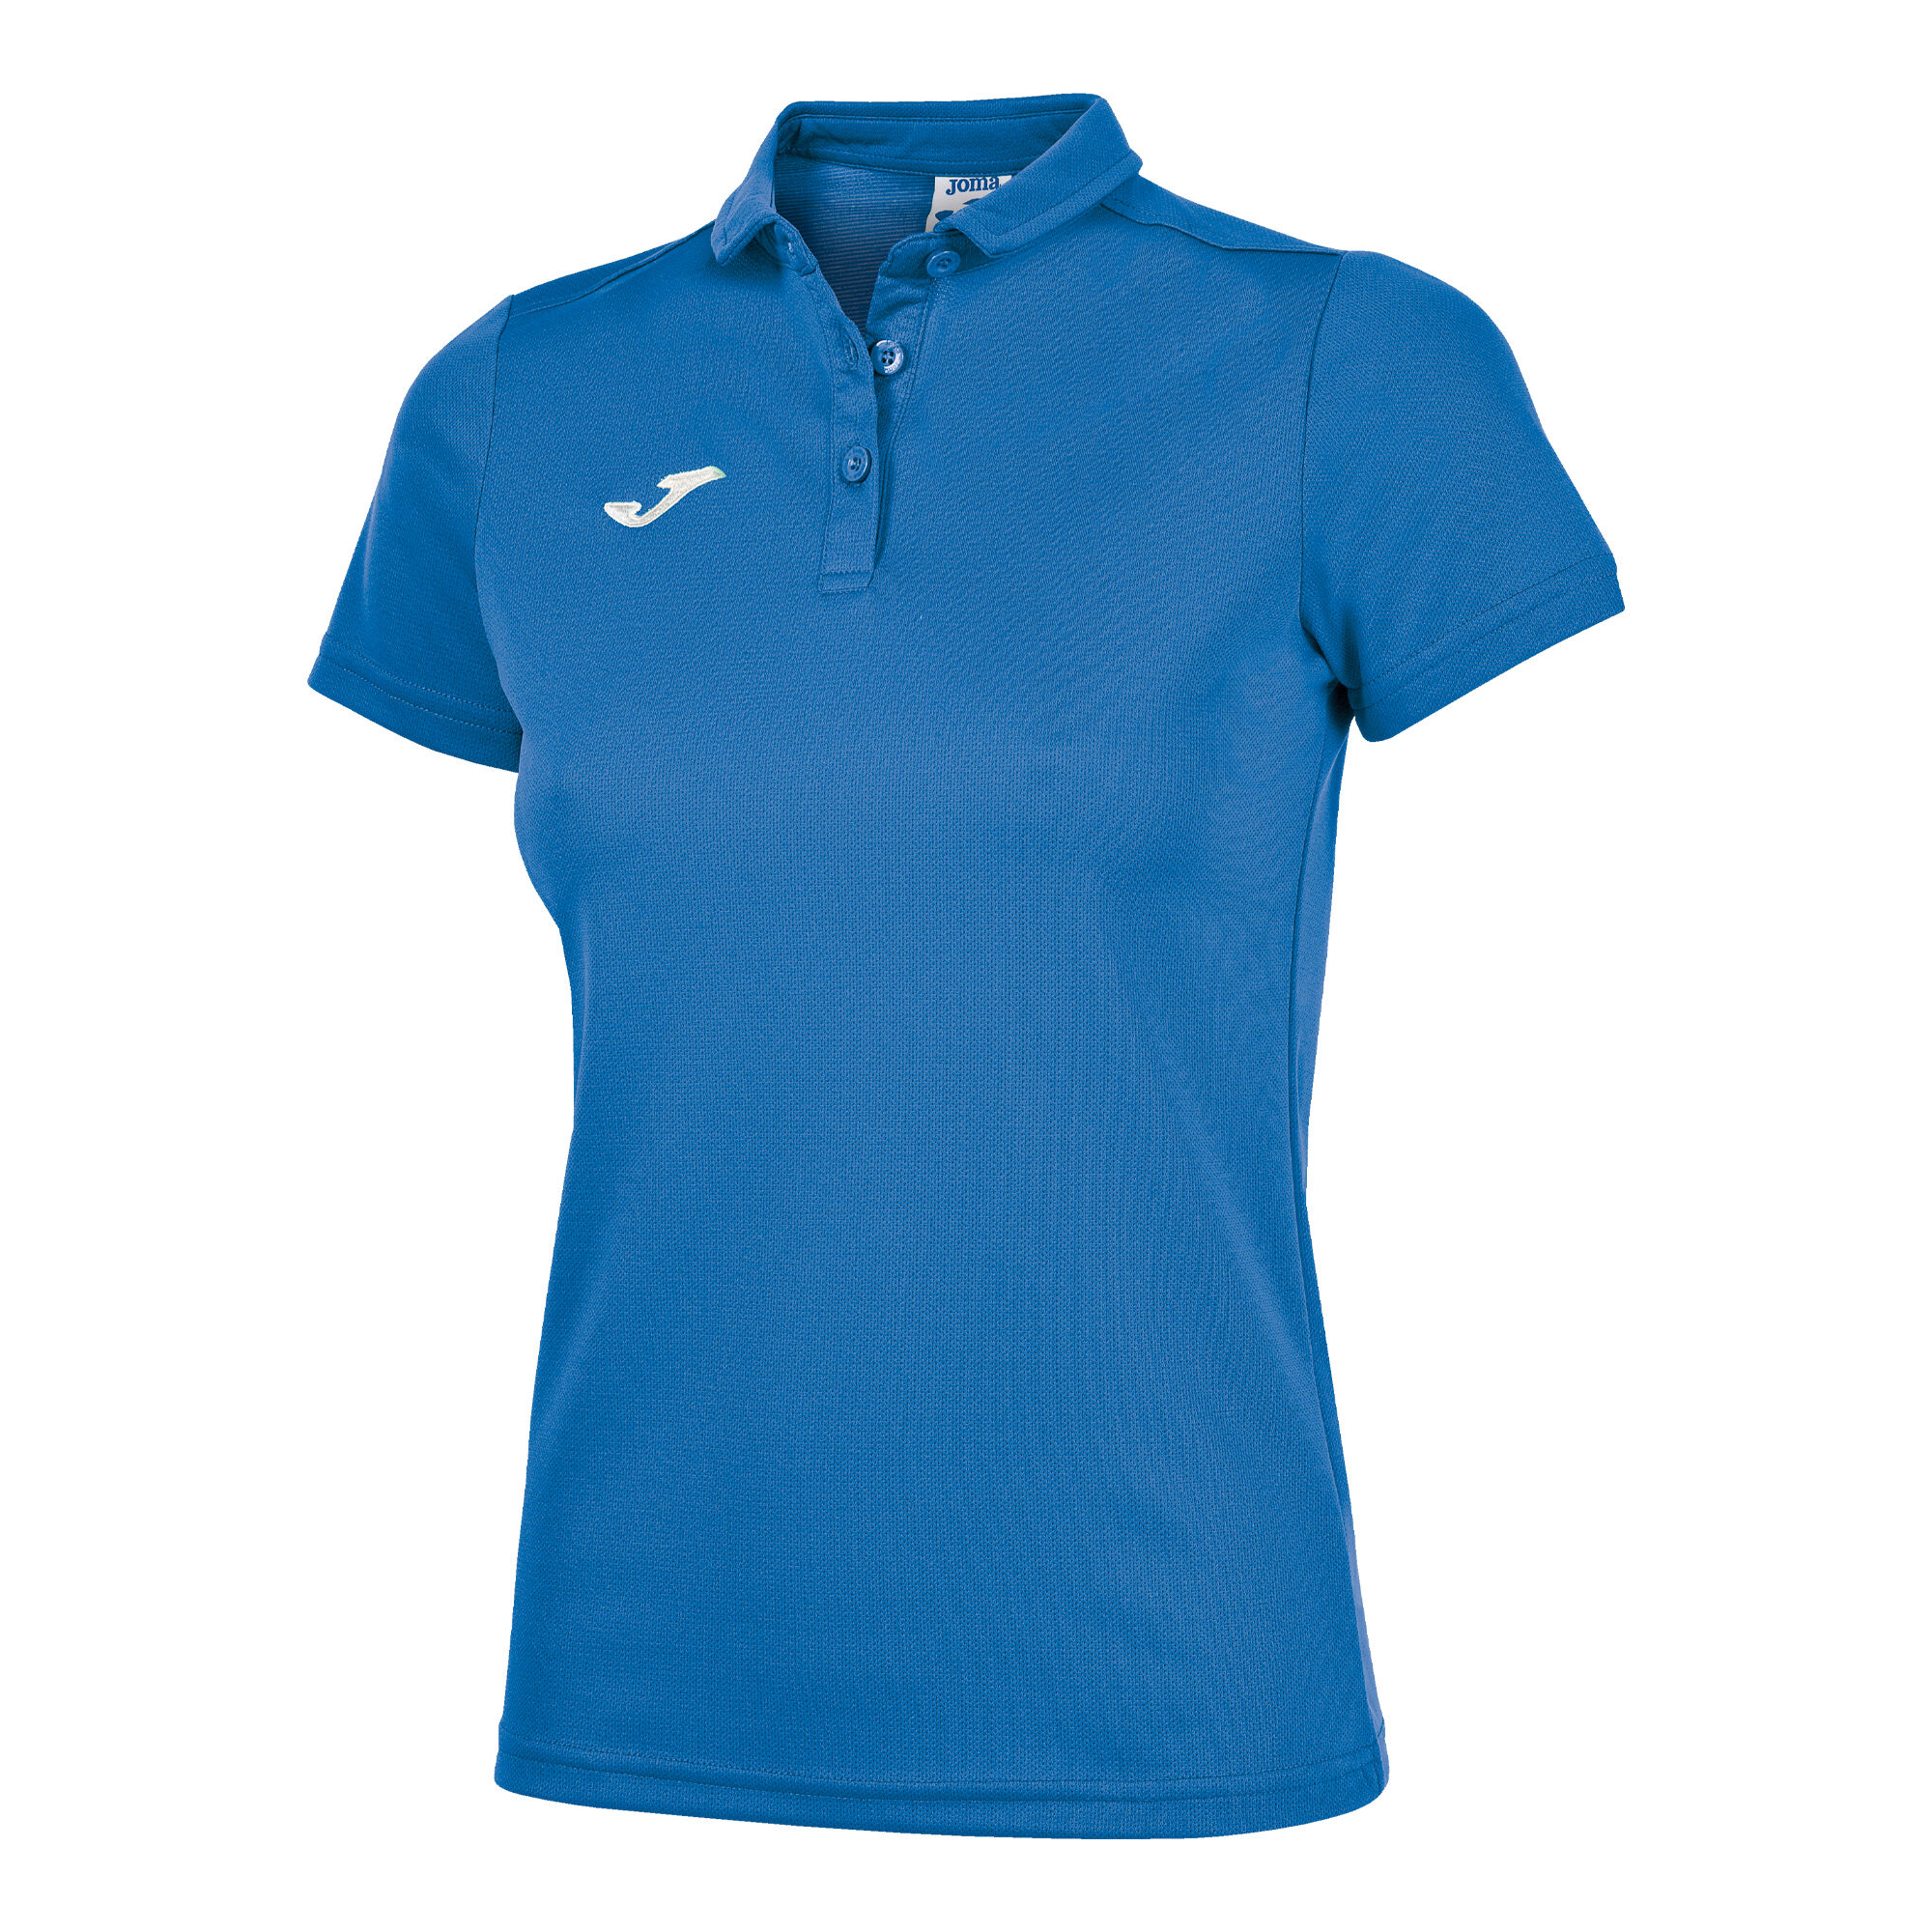 POLO M/C DONNA HOBBY BLU REALE